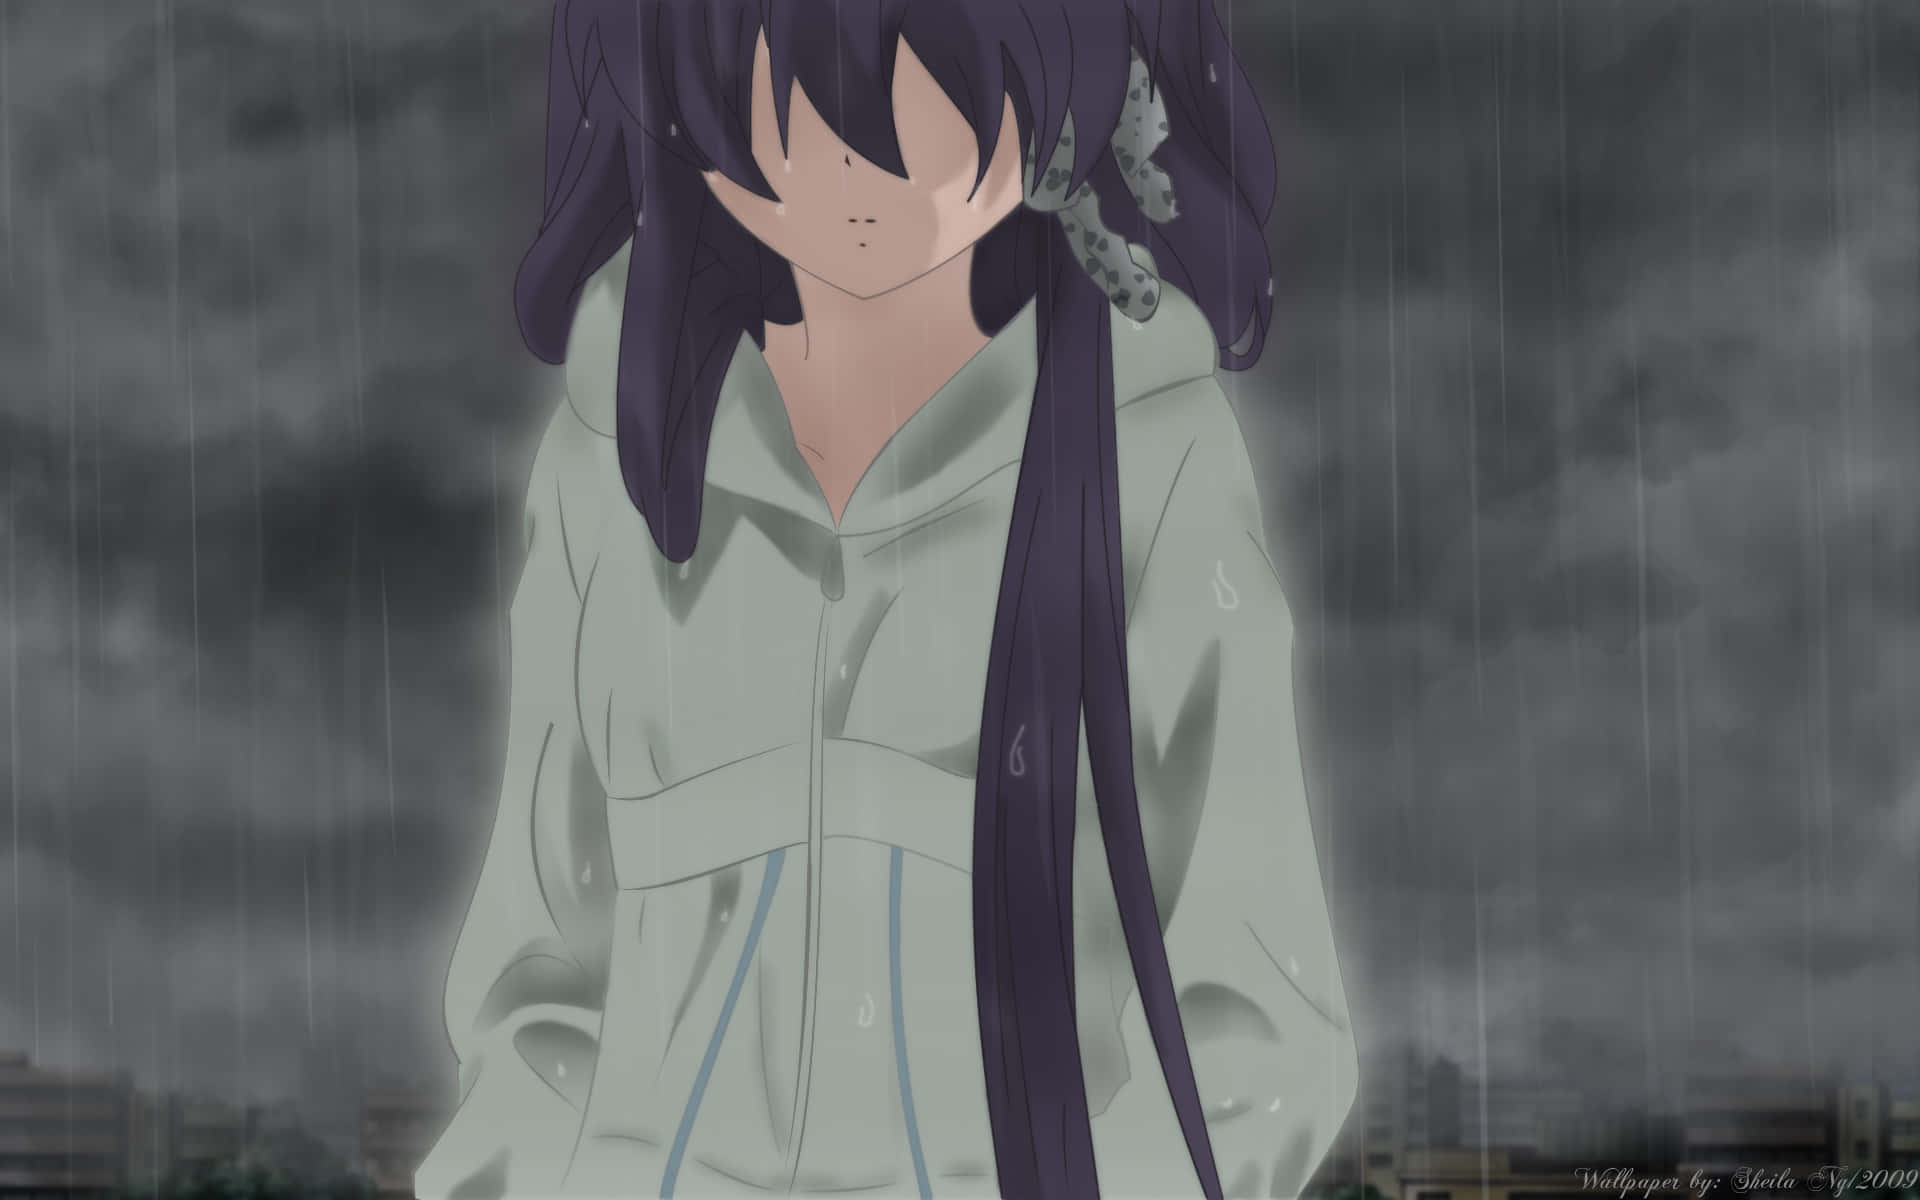 A lonely yet beautiful anime girl looking out over a city skyline with a feeling of sadness. Wallpaper